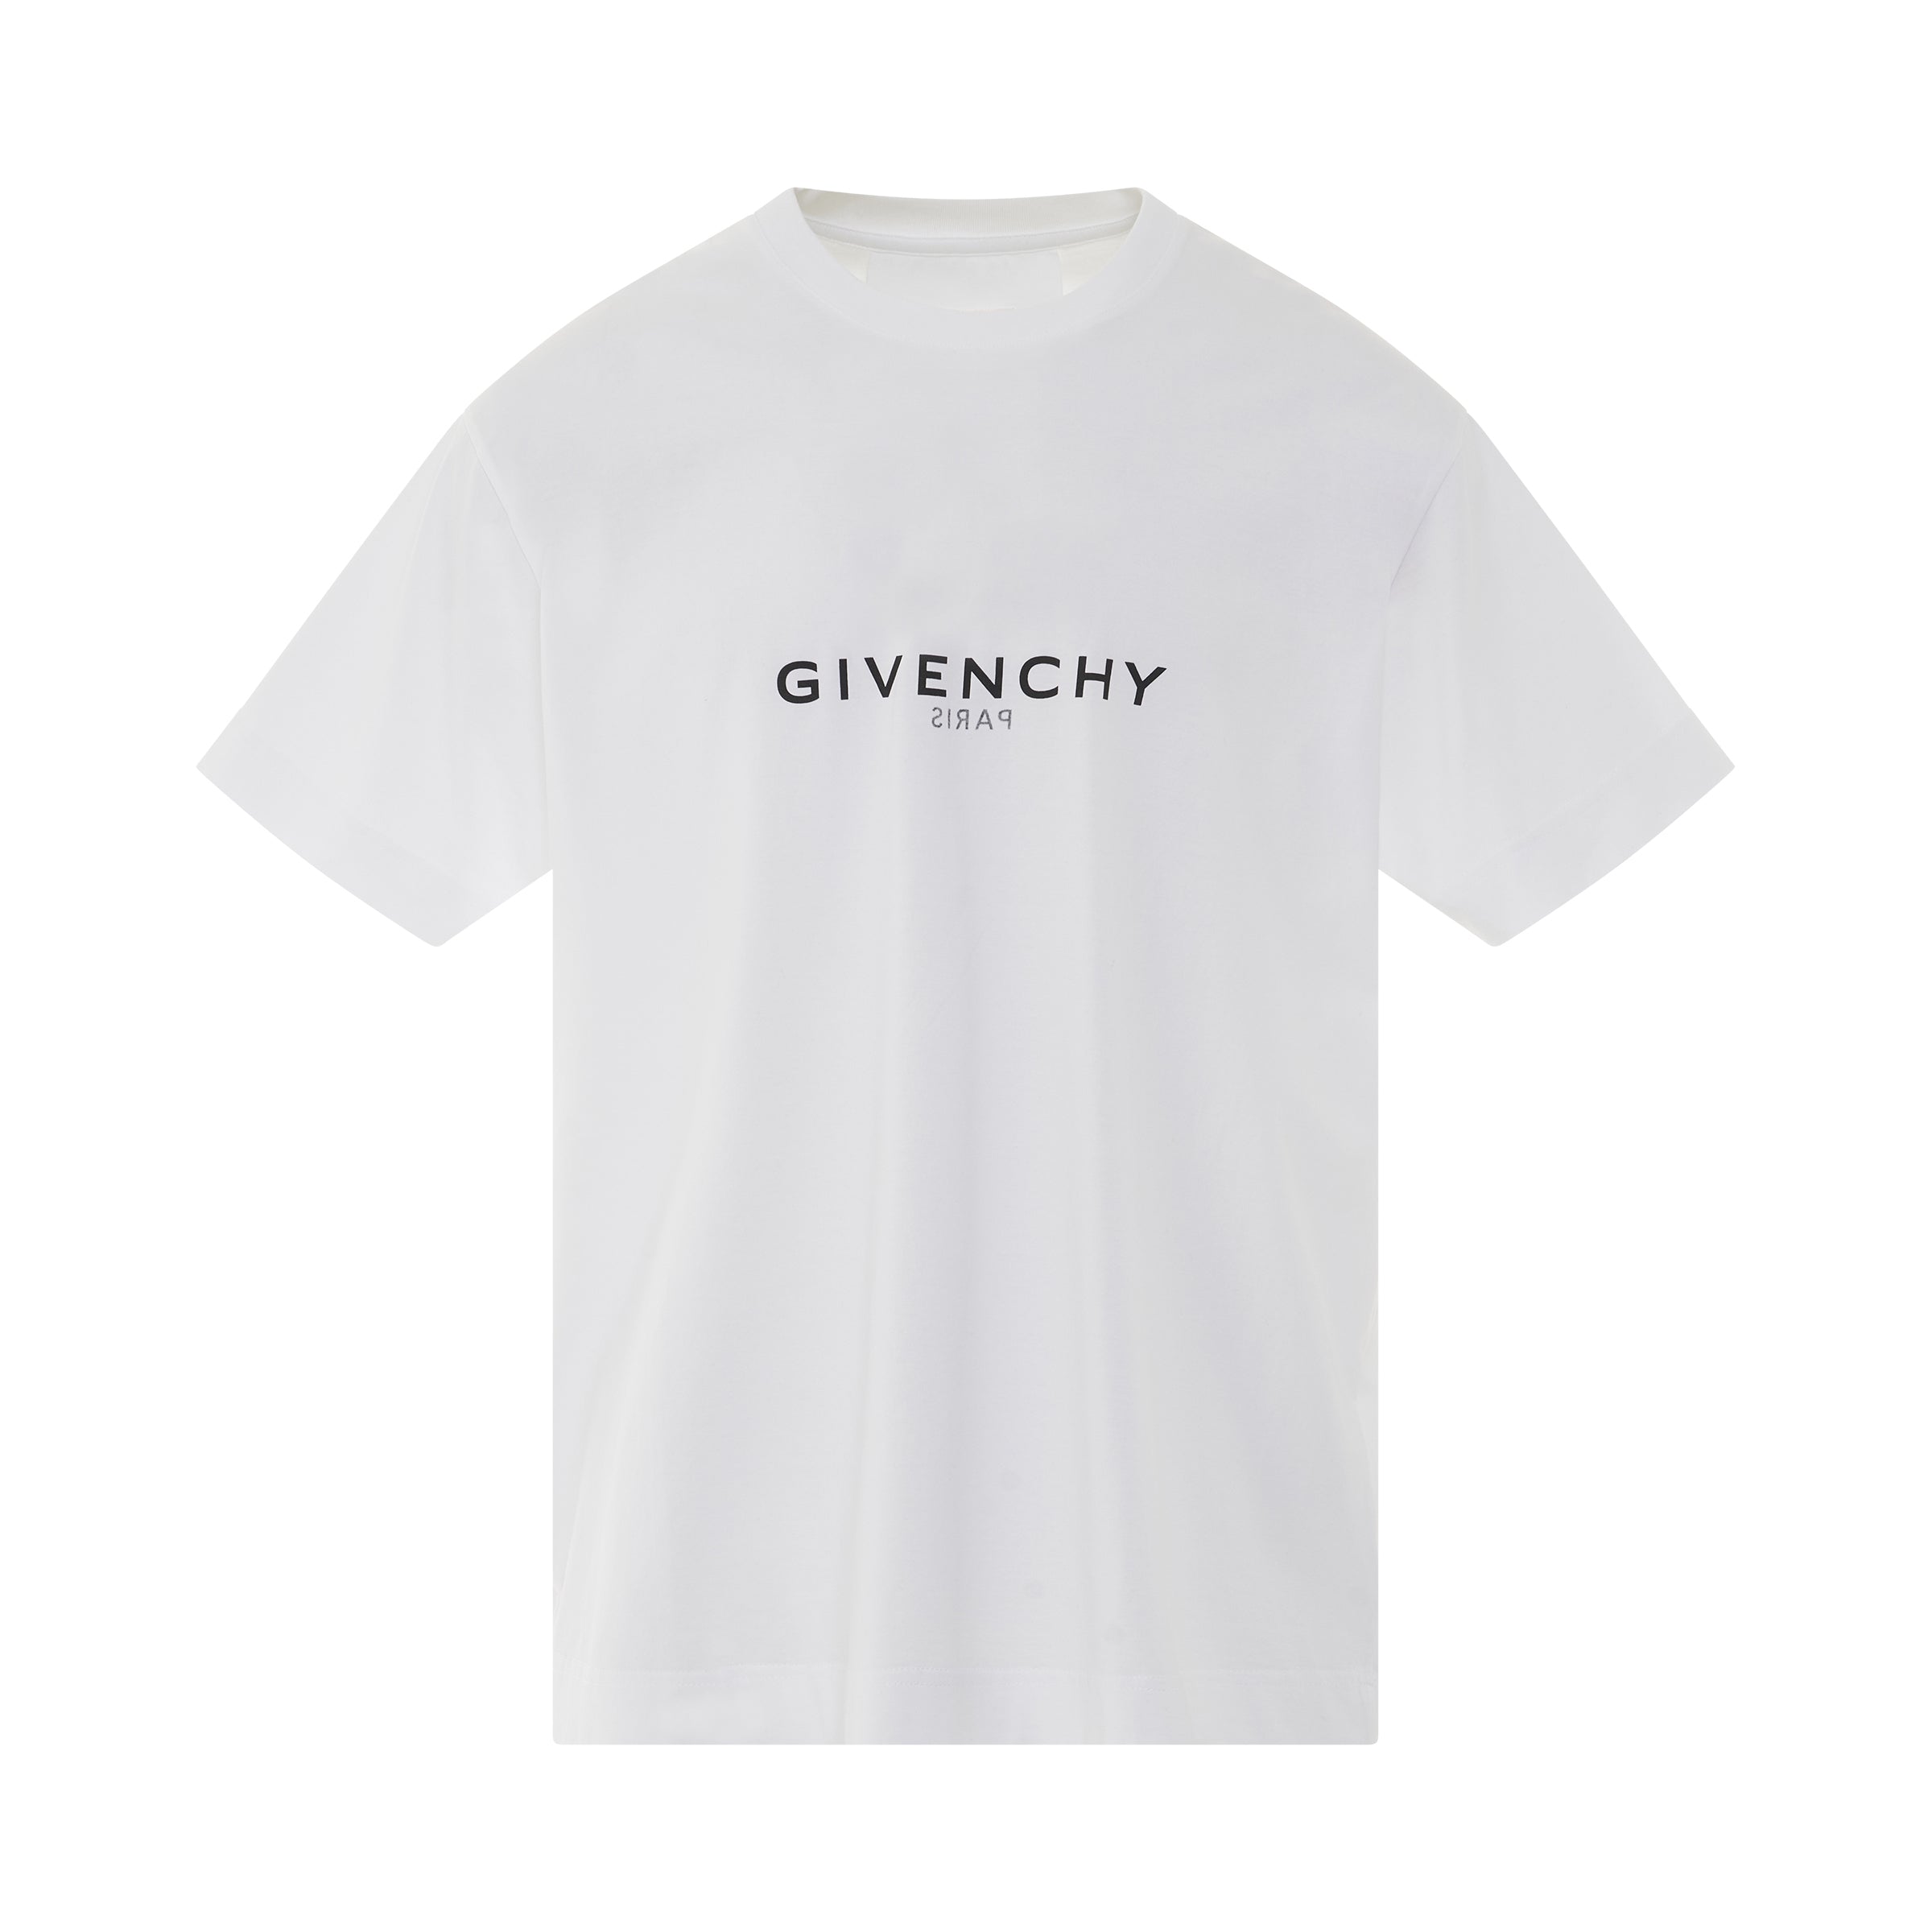 givenchy reverse logo oversized t shirt in white sold out sold out sale ...